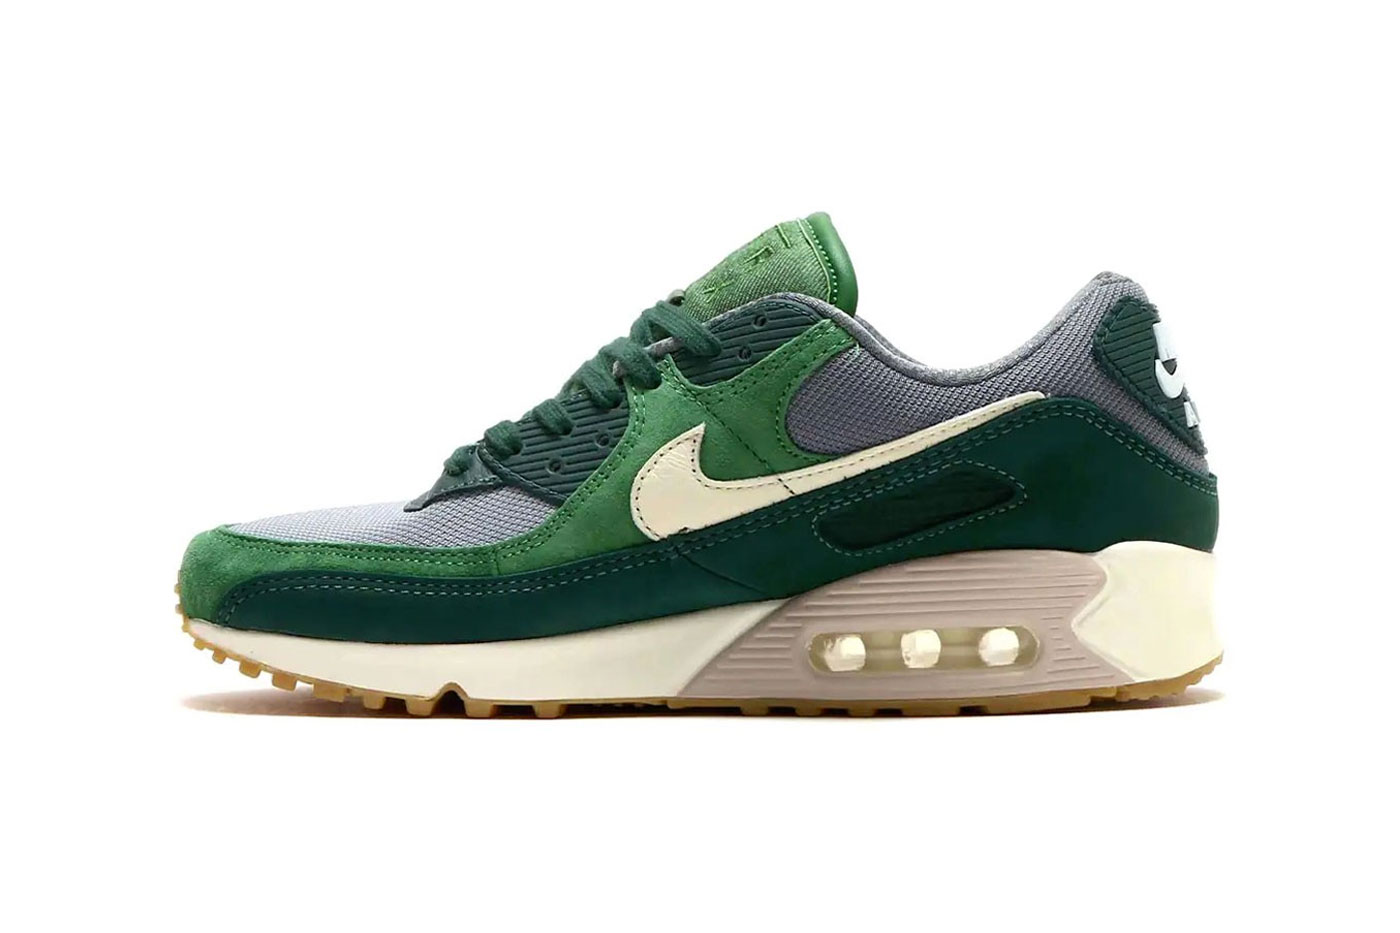 nikes-air-max-90-arrives-in-p_1